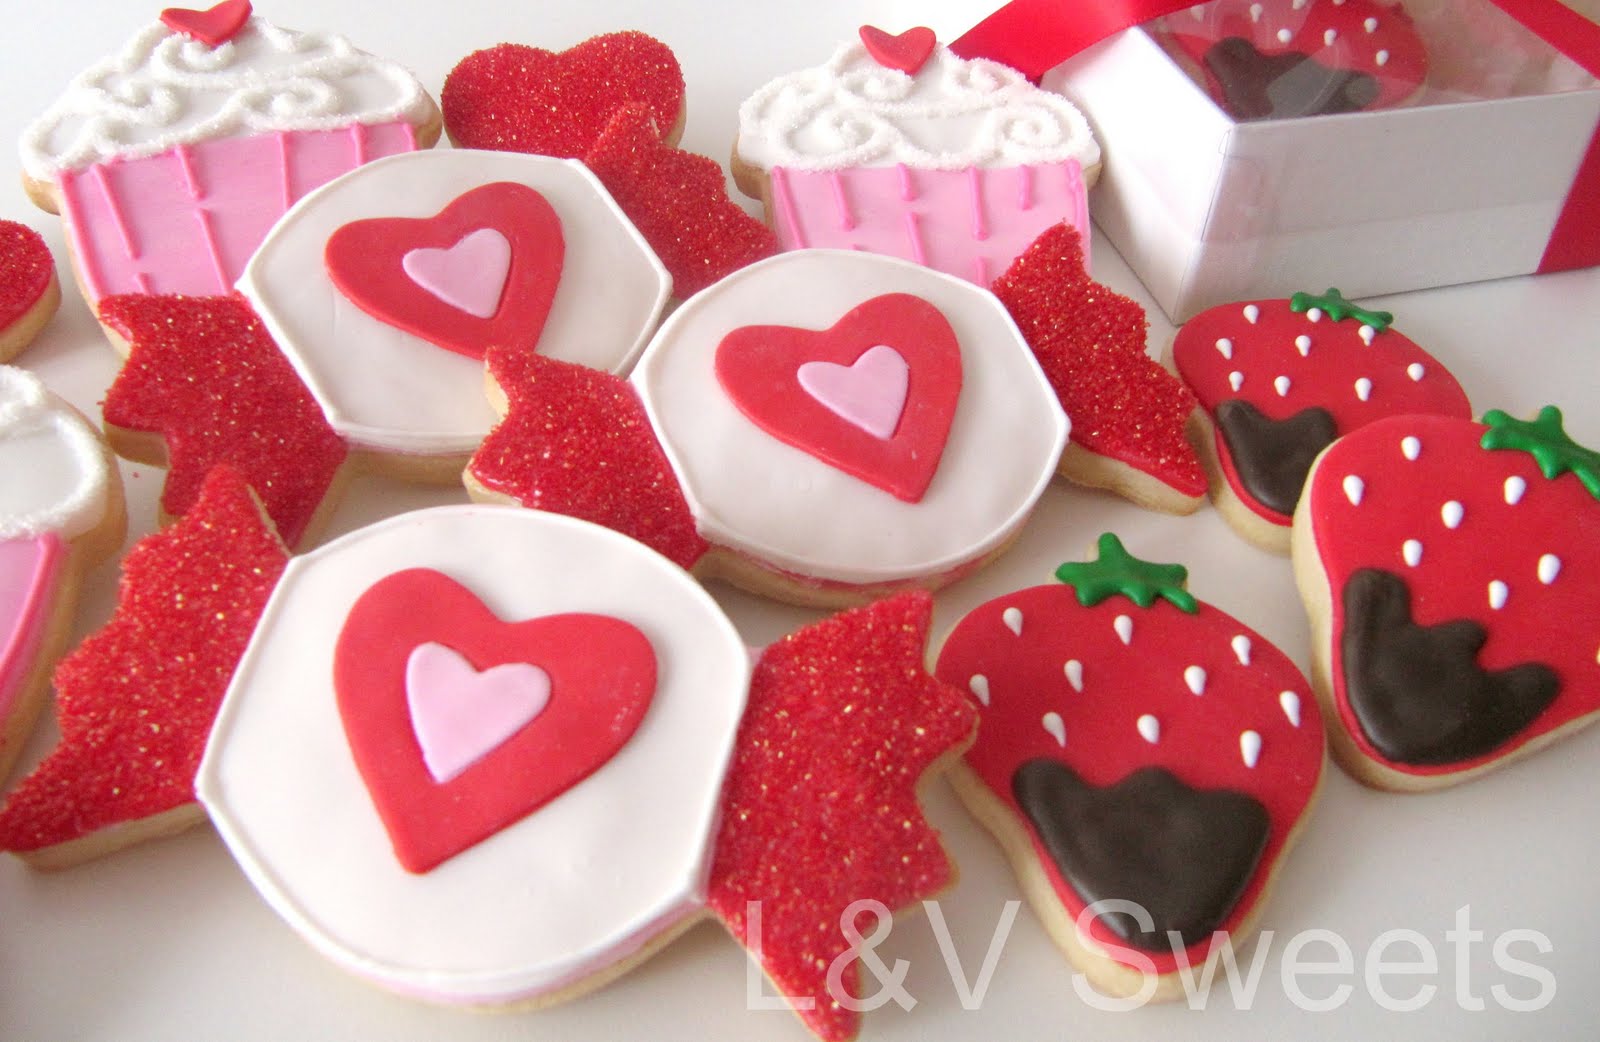 valentine's day sweets Ideas and Pictures - Chocolates and Cakes1600 x 1042